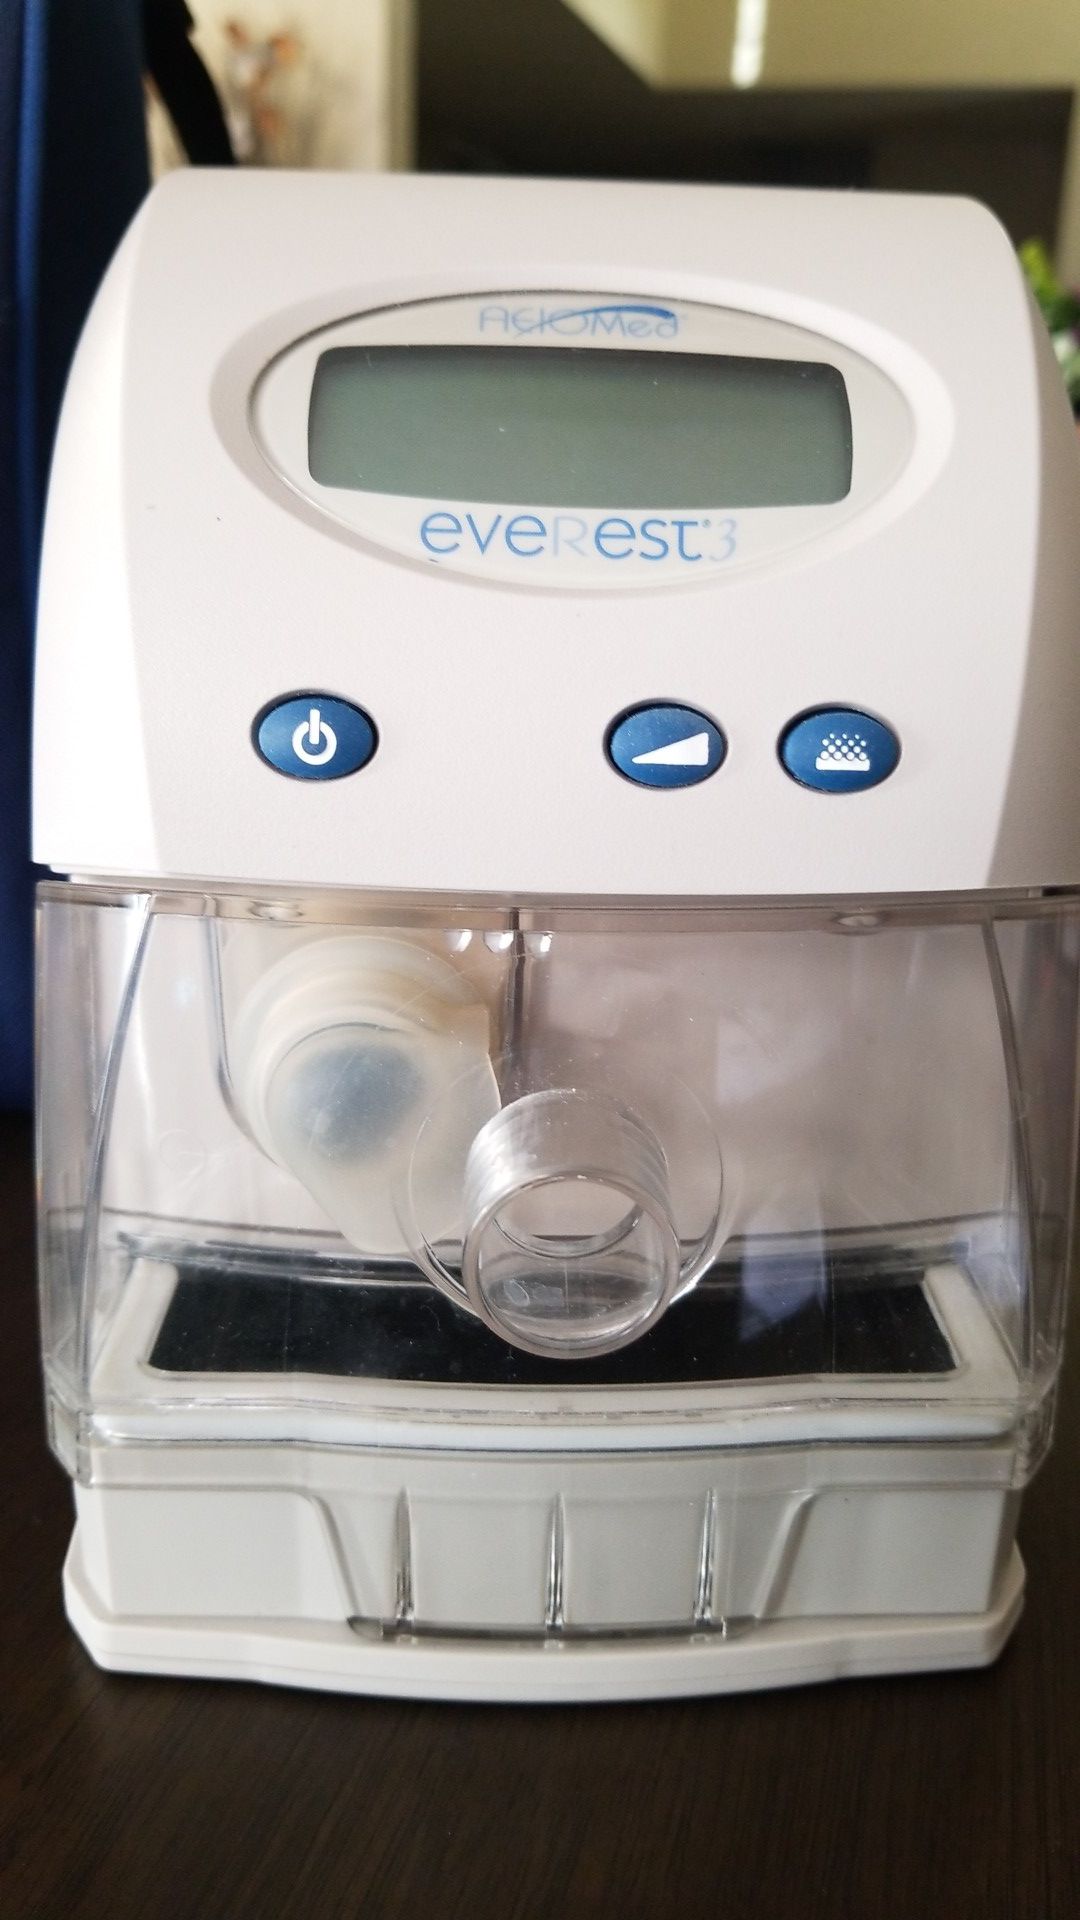 Aeiomed Everest 3 CPAP, Humidifier and Battery Pack